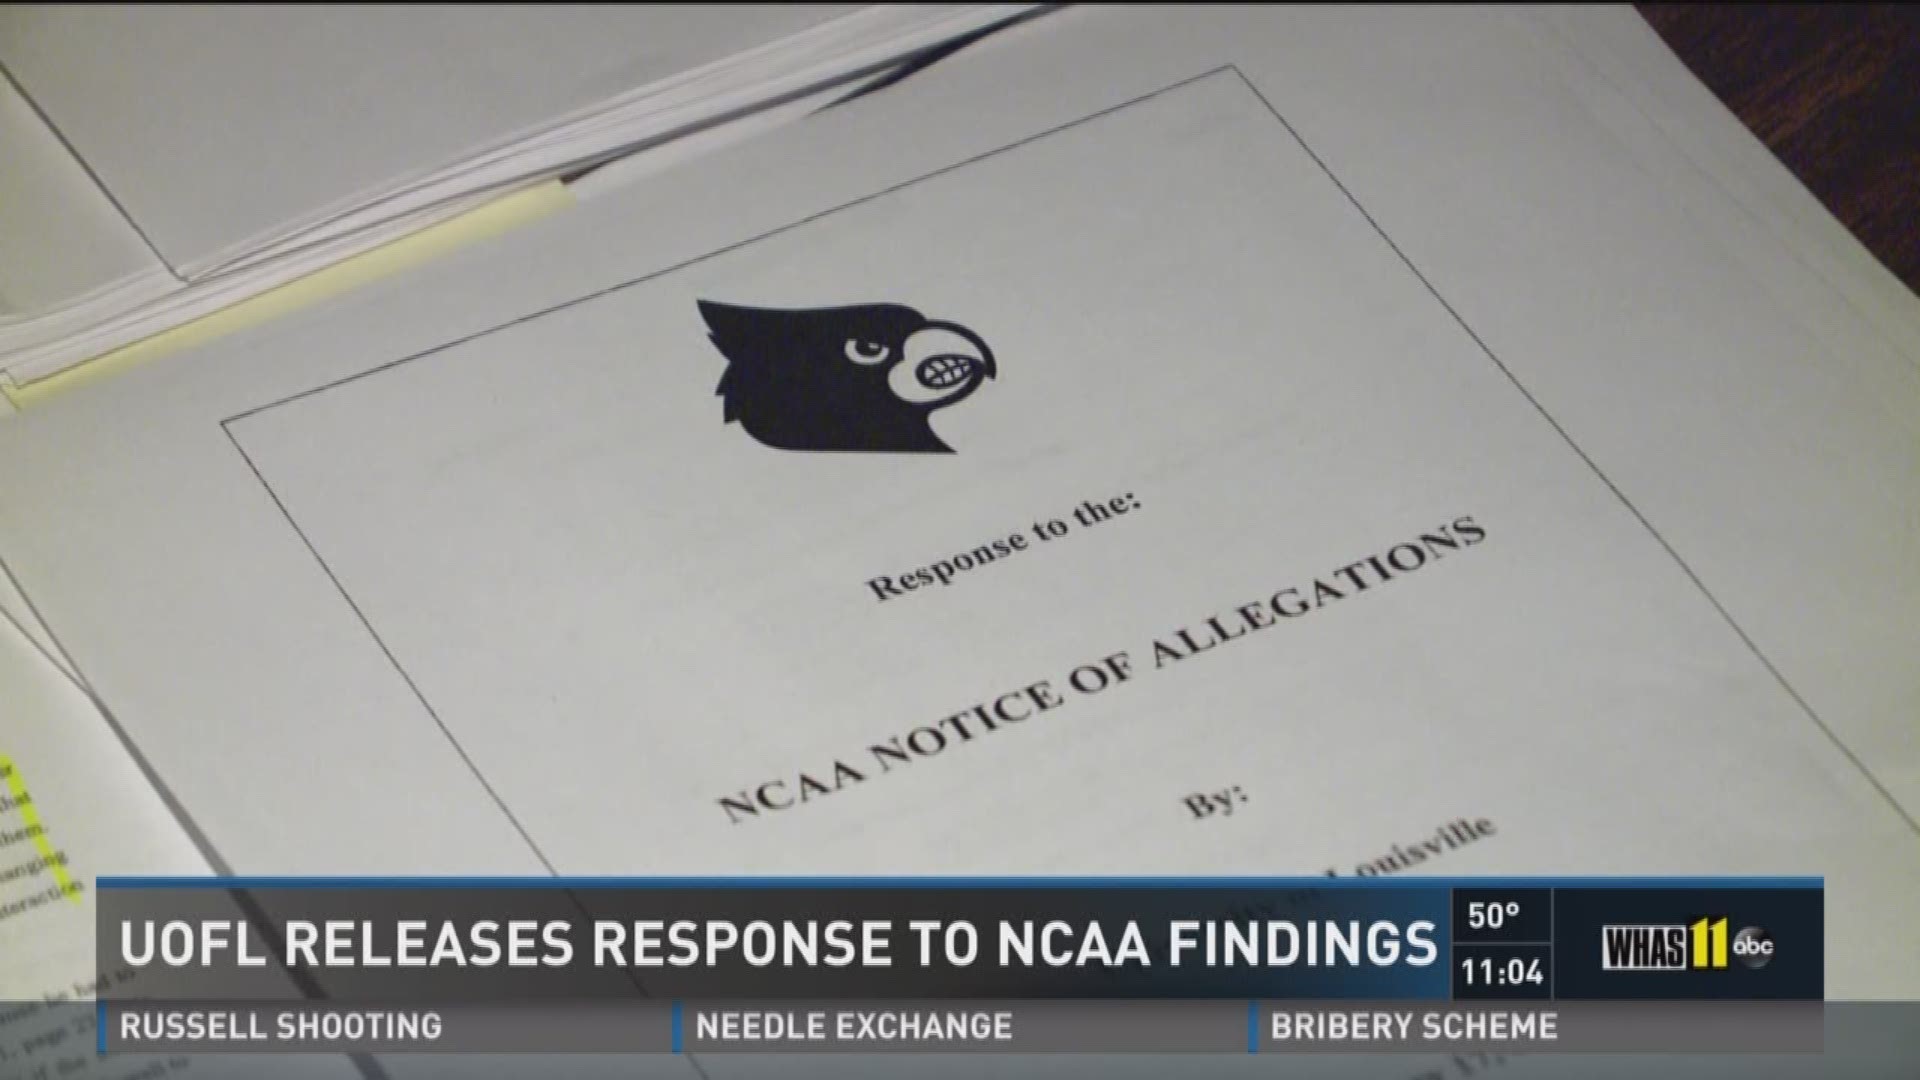 UofL releases response to NCAA findings